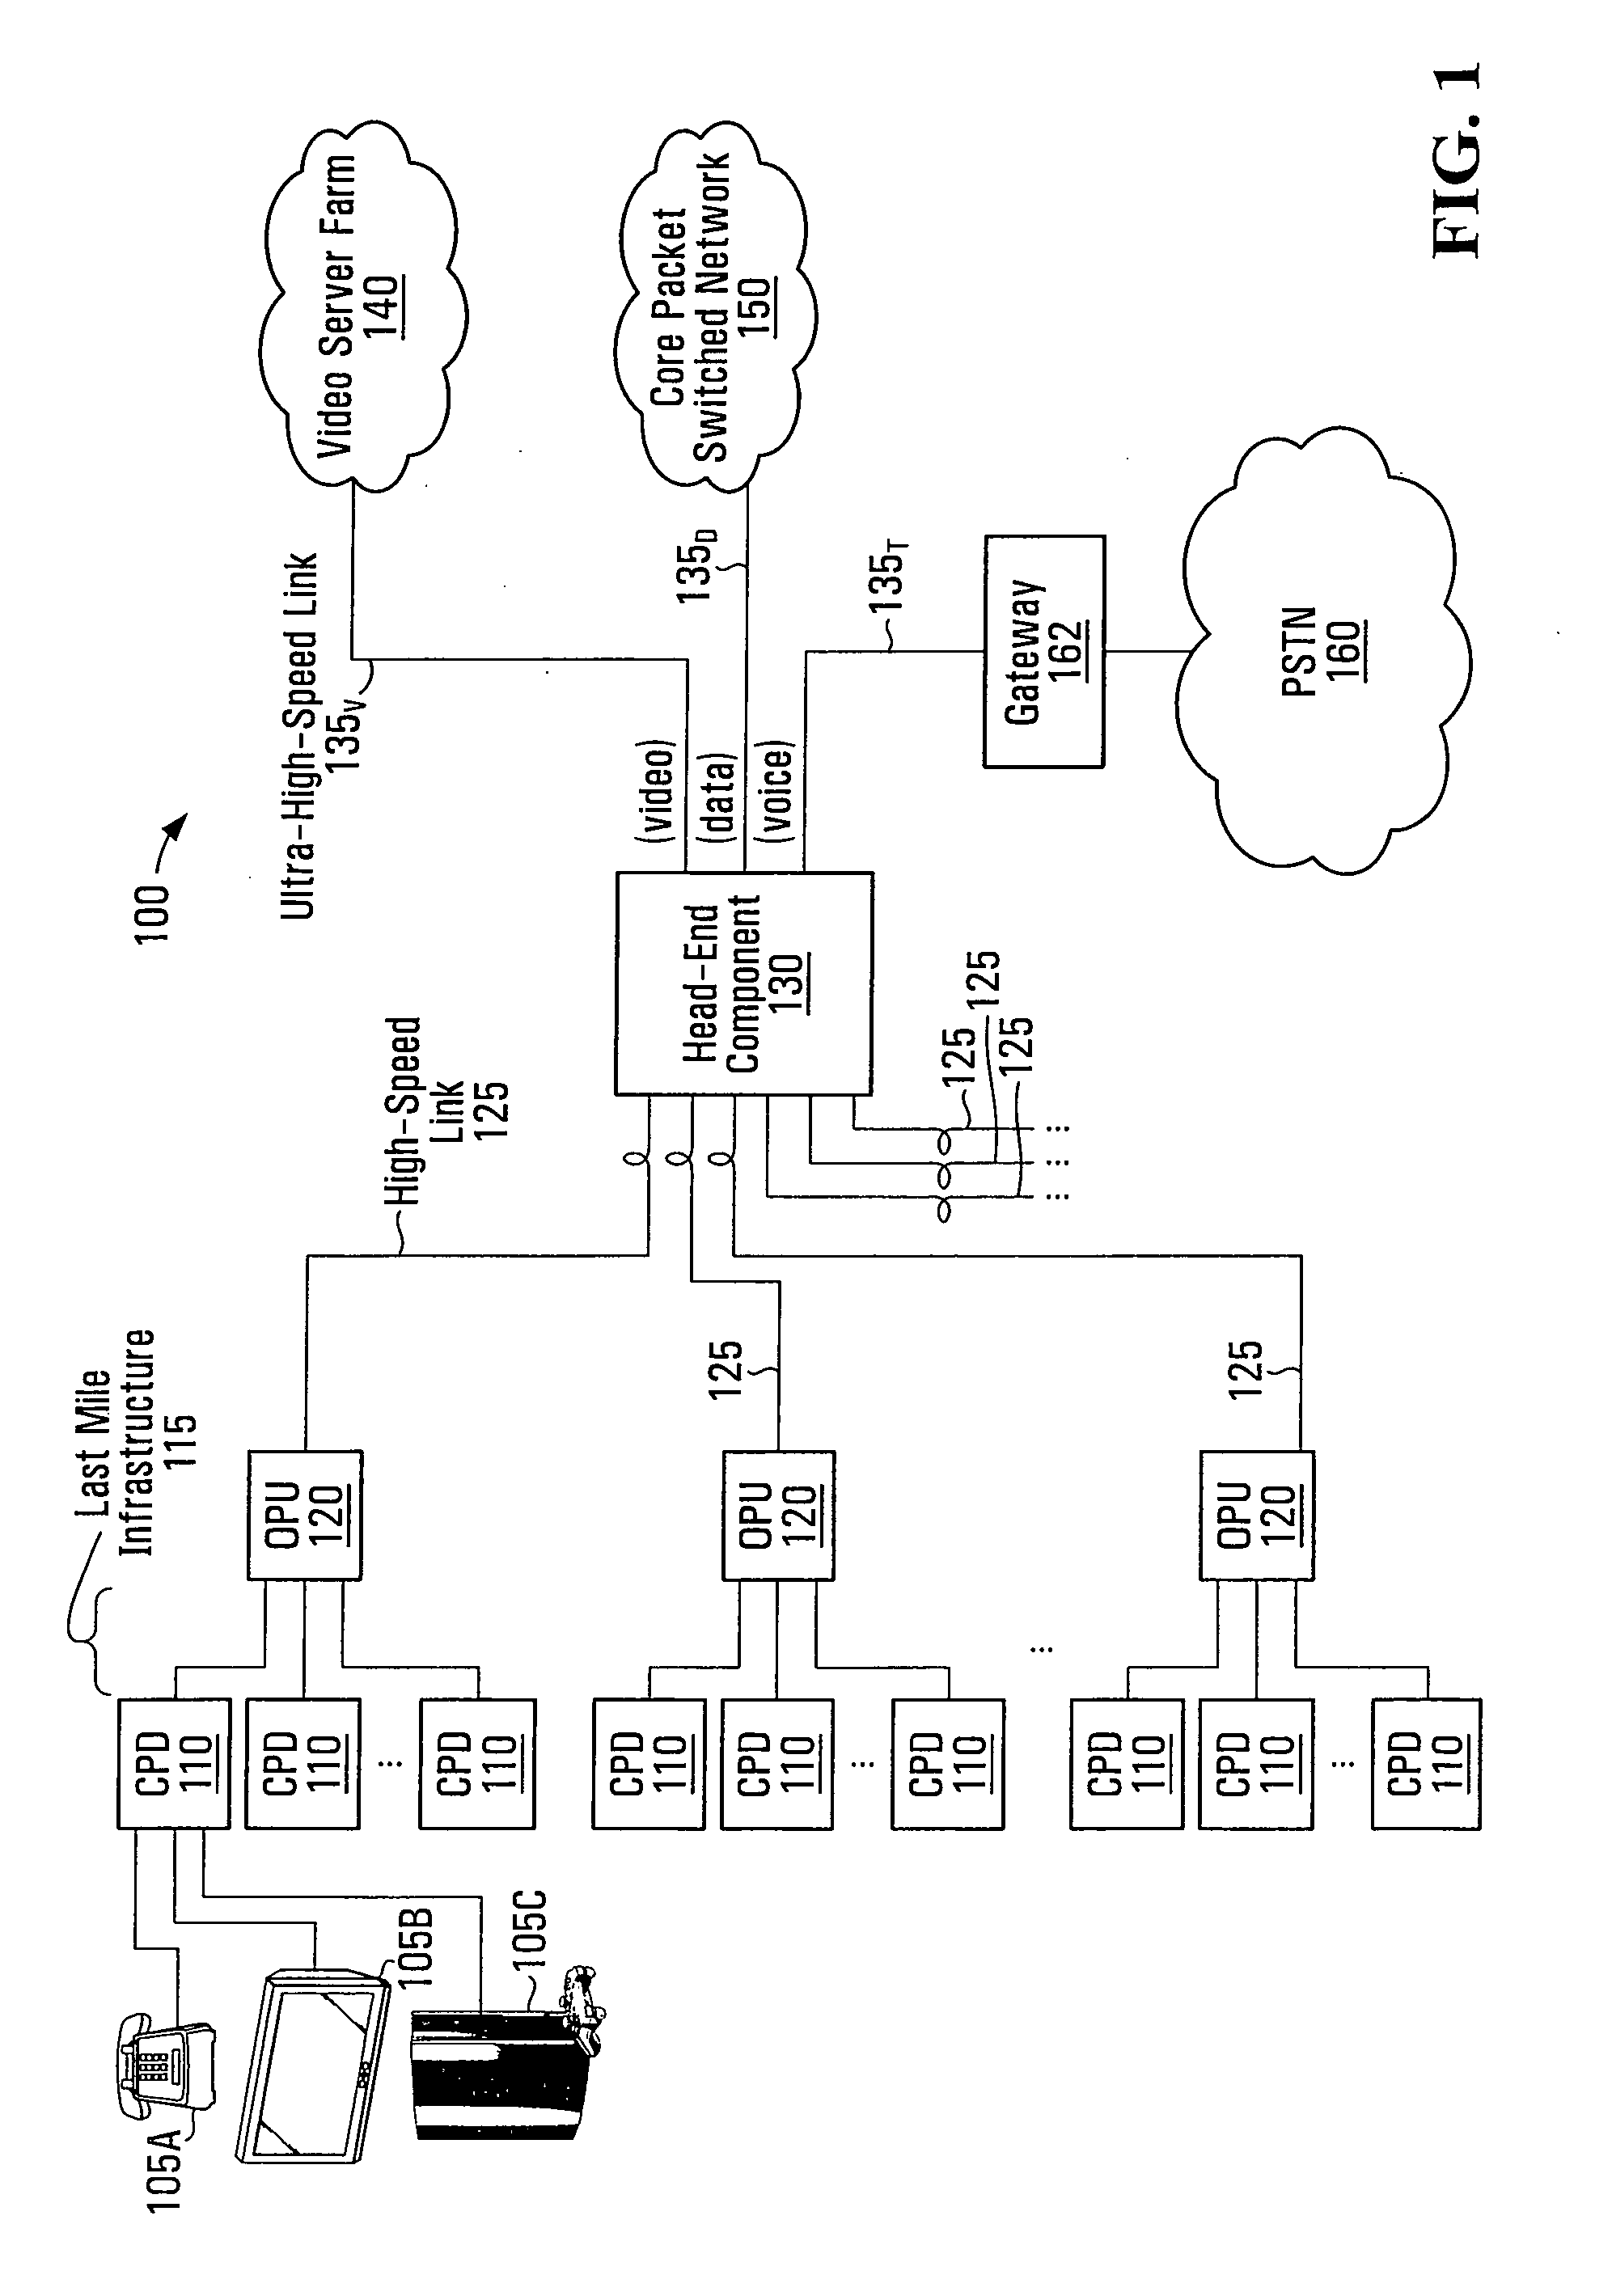 Method and system for service-based regulation of traffic flow to customer premises devices